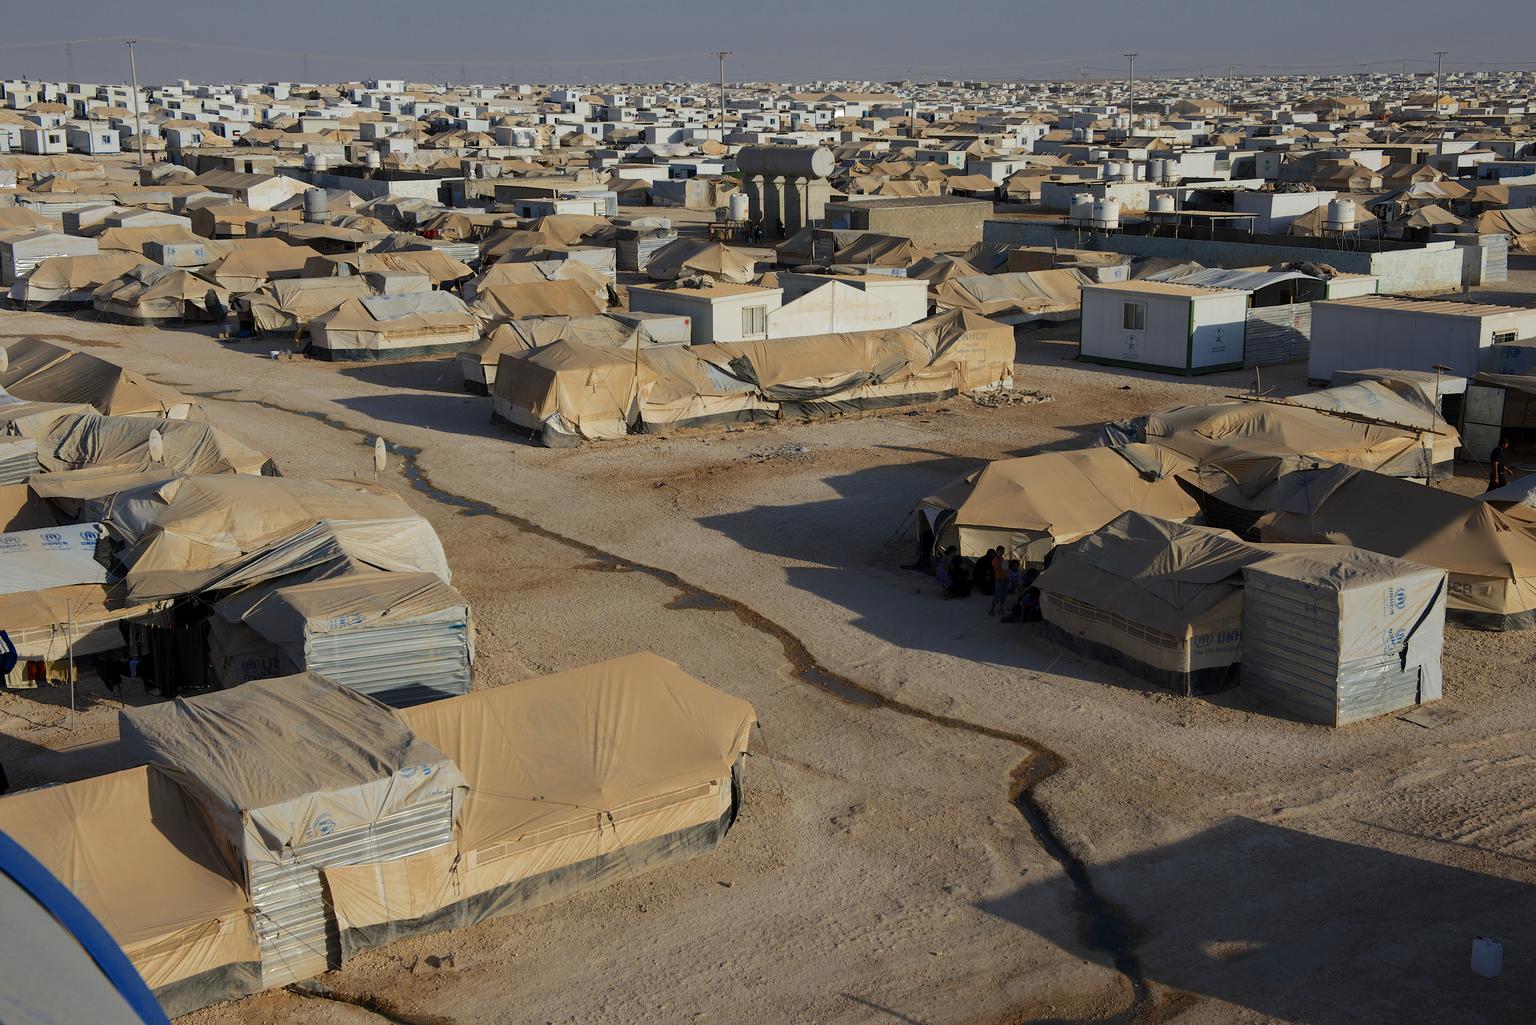 A panoramic image of a refugee camp.